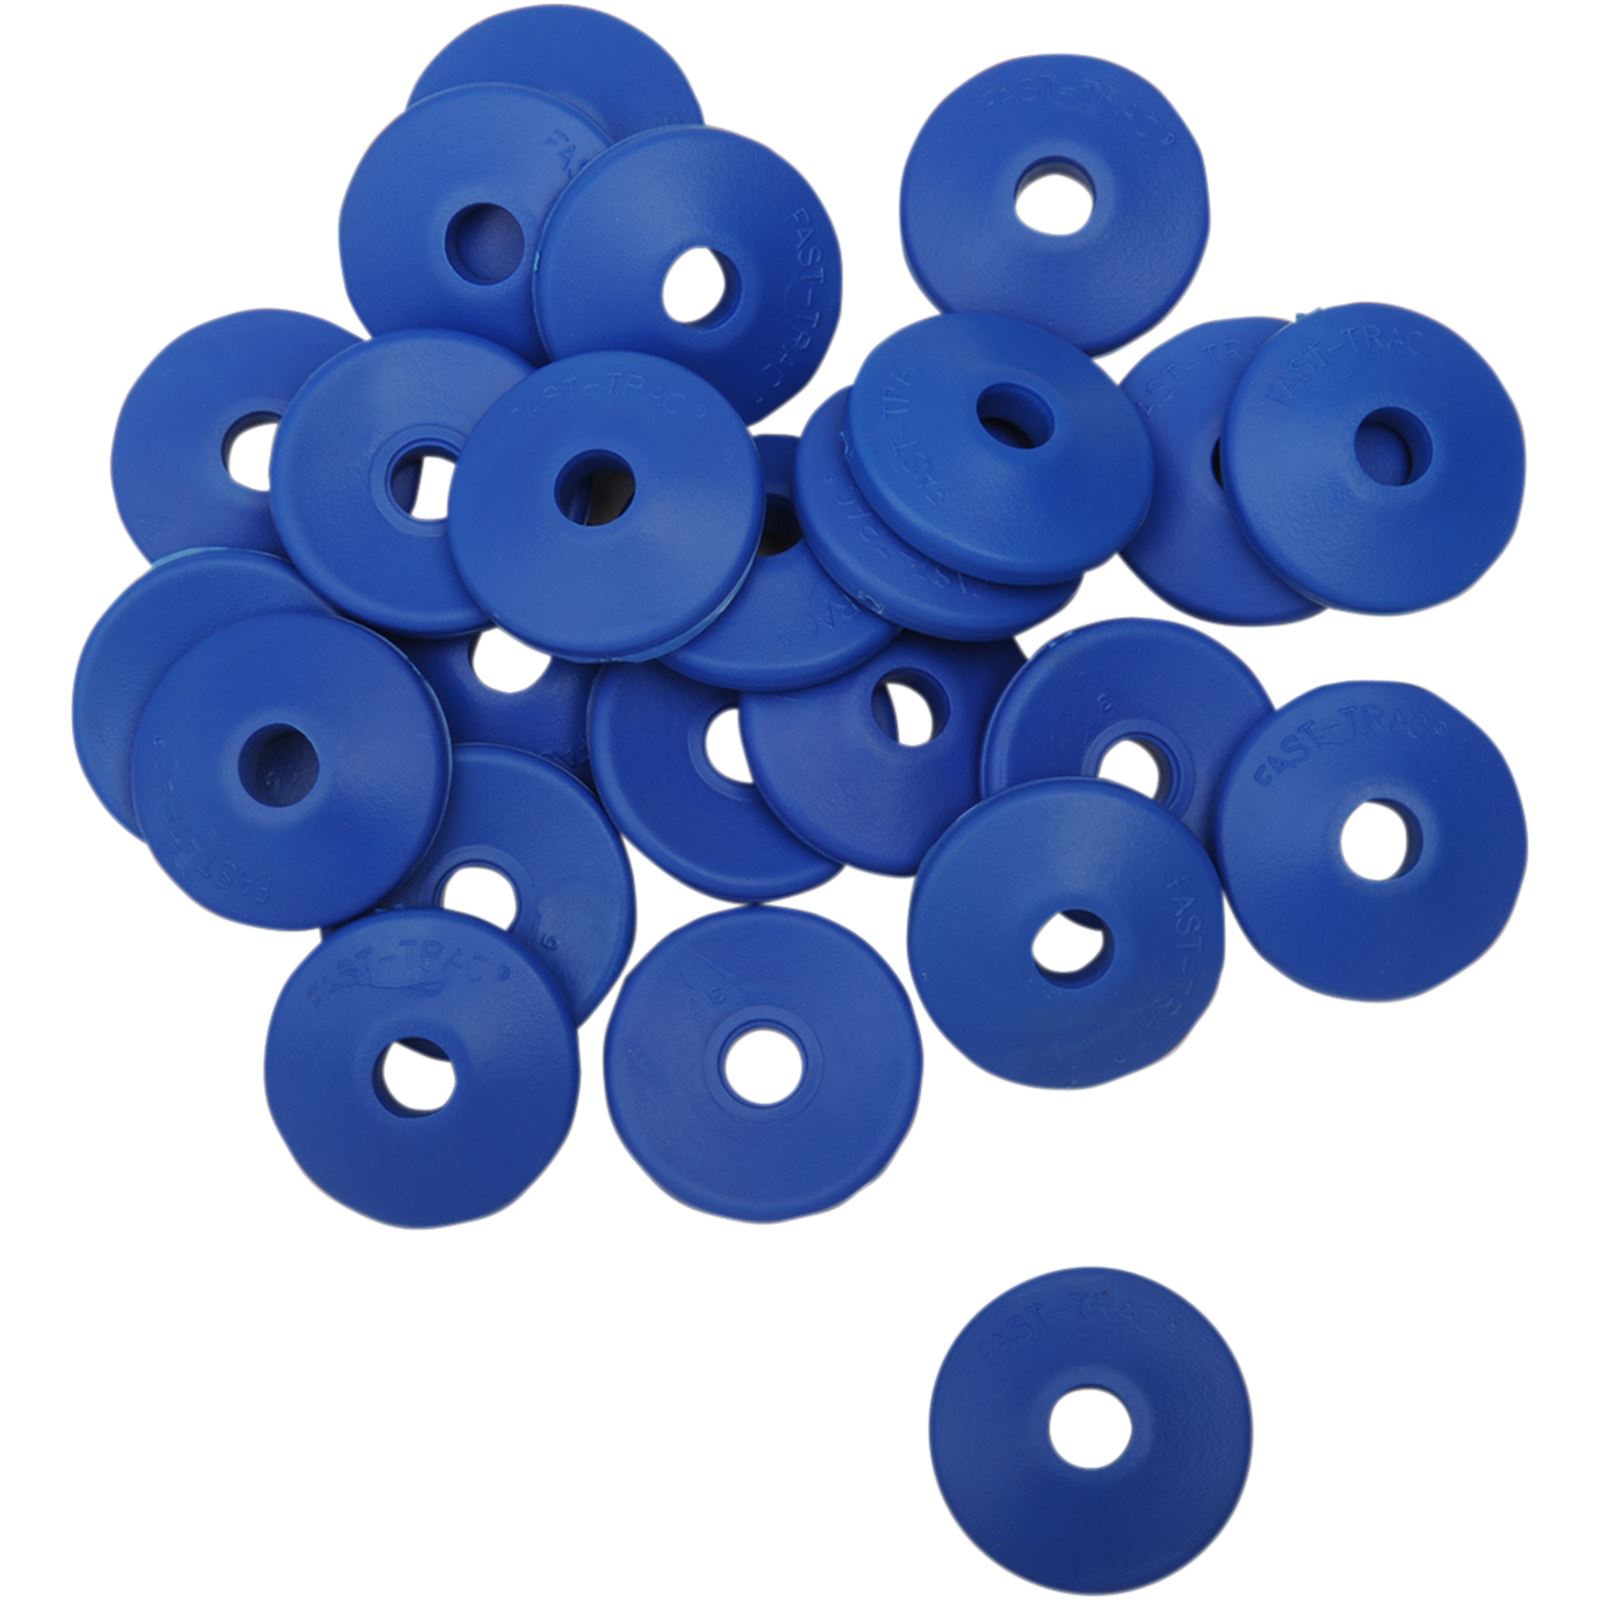 Fast-Trac Backer Plates - Blue - Round - 96/Pack